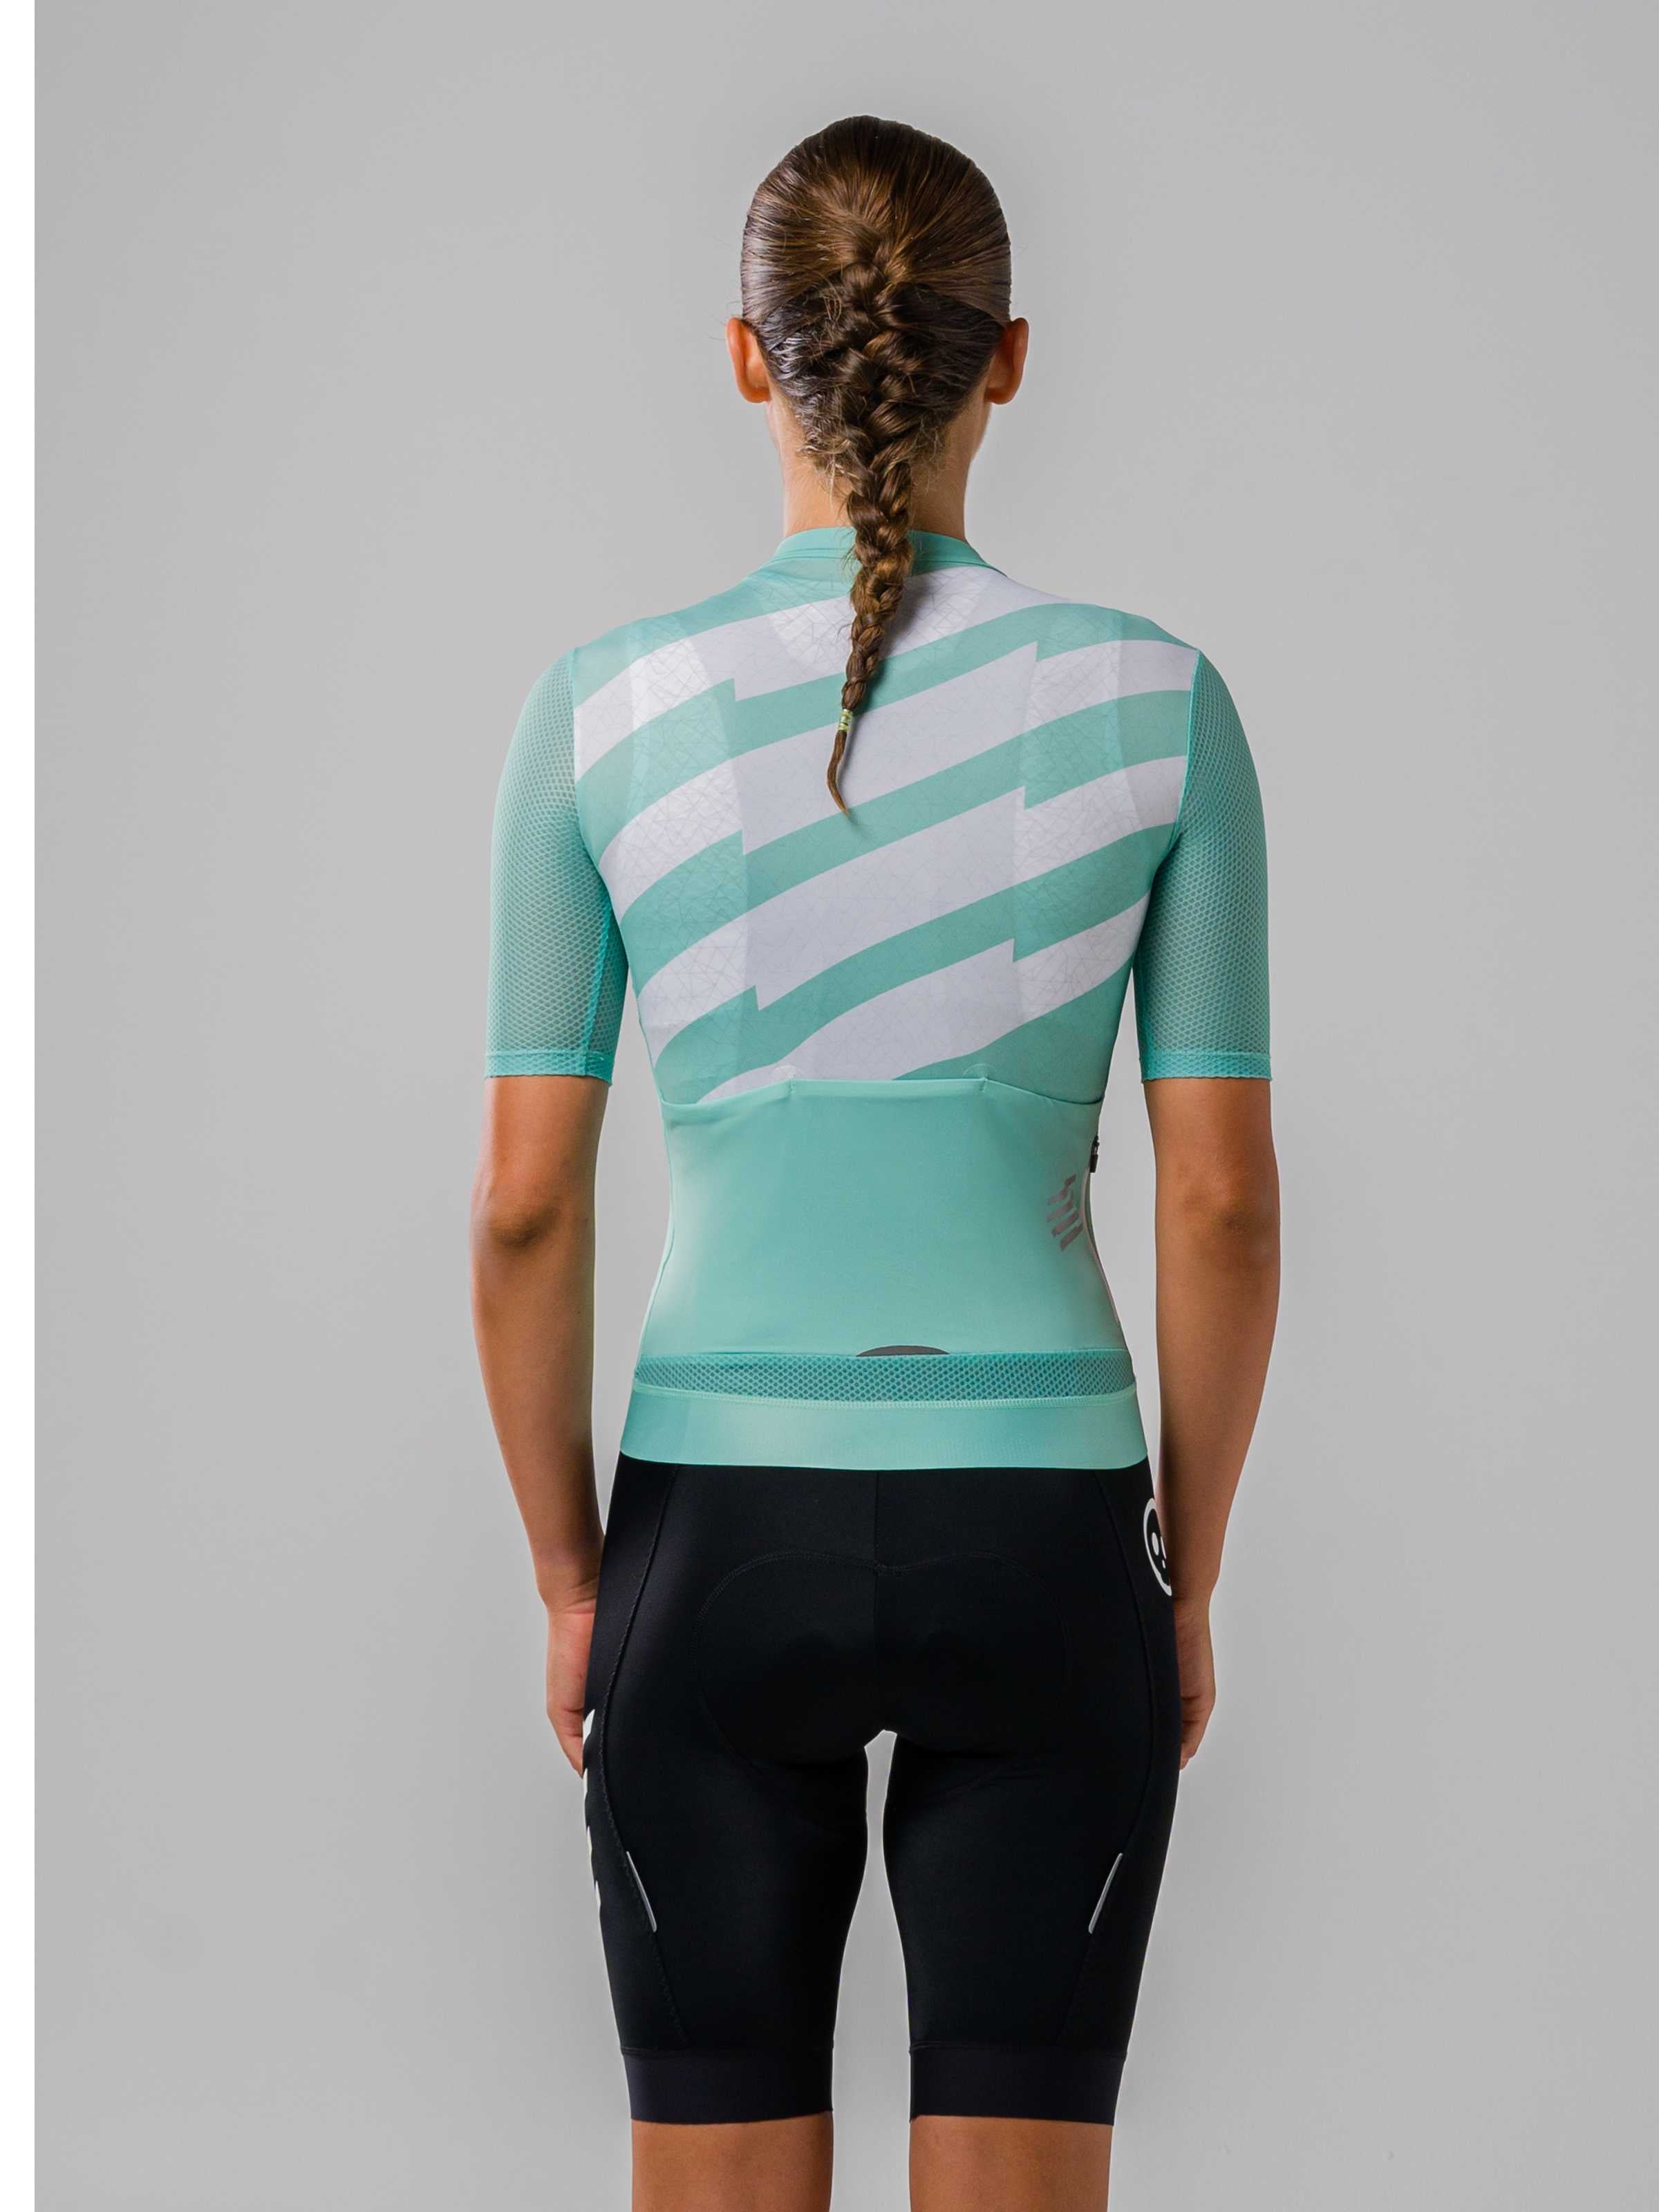 green cycling jersey